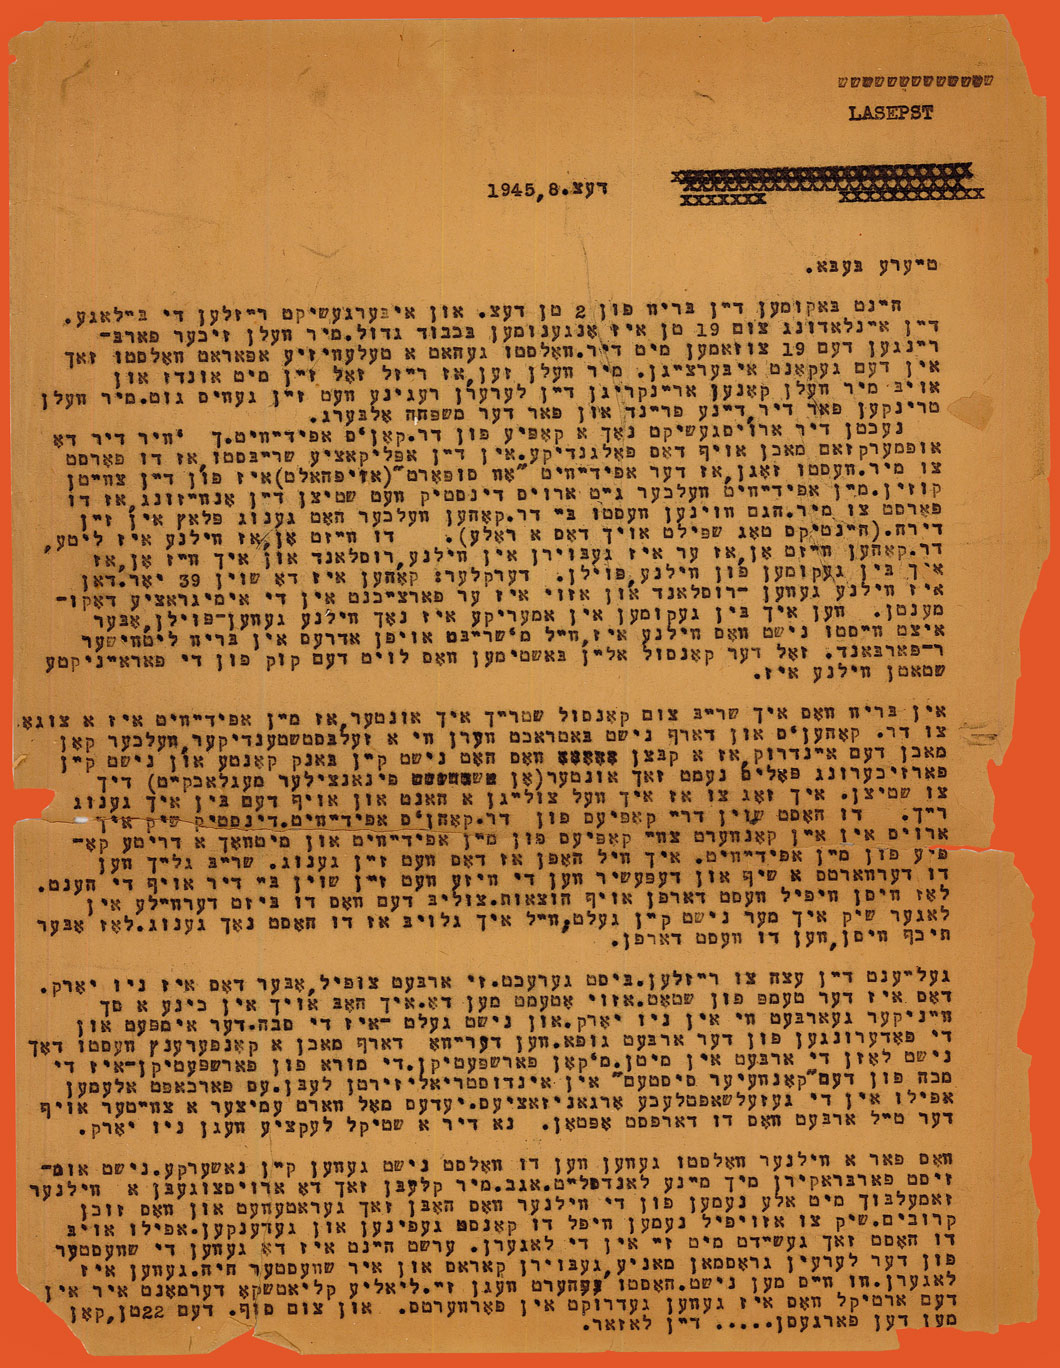 A Letter in typed Yiddish from Lasar to Beba